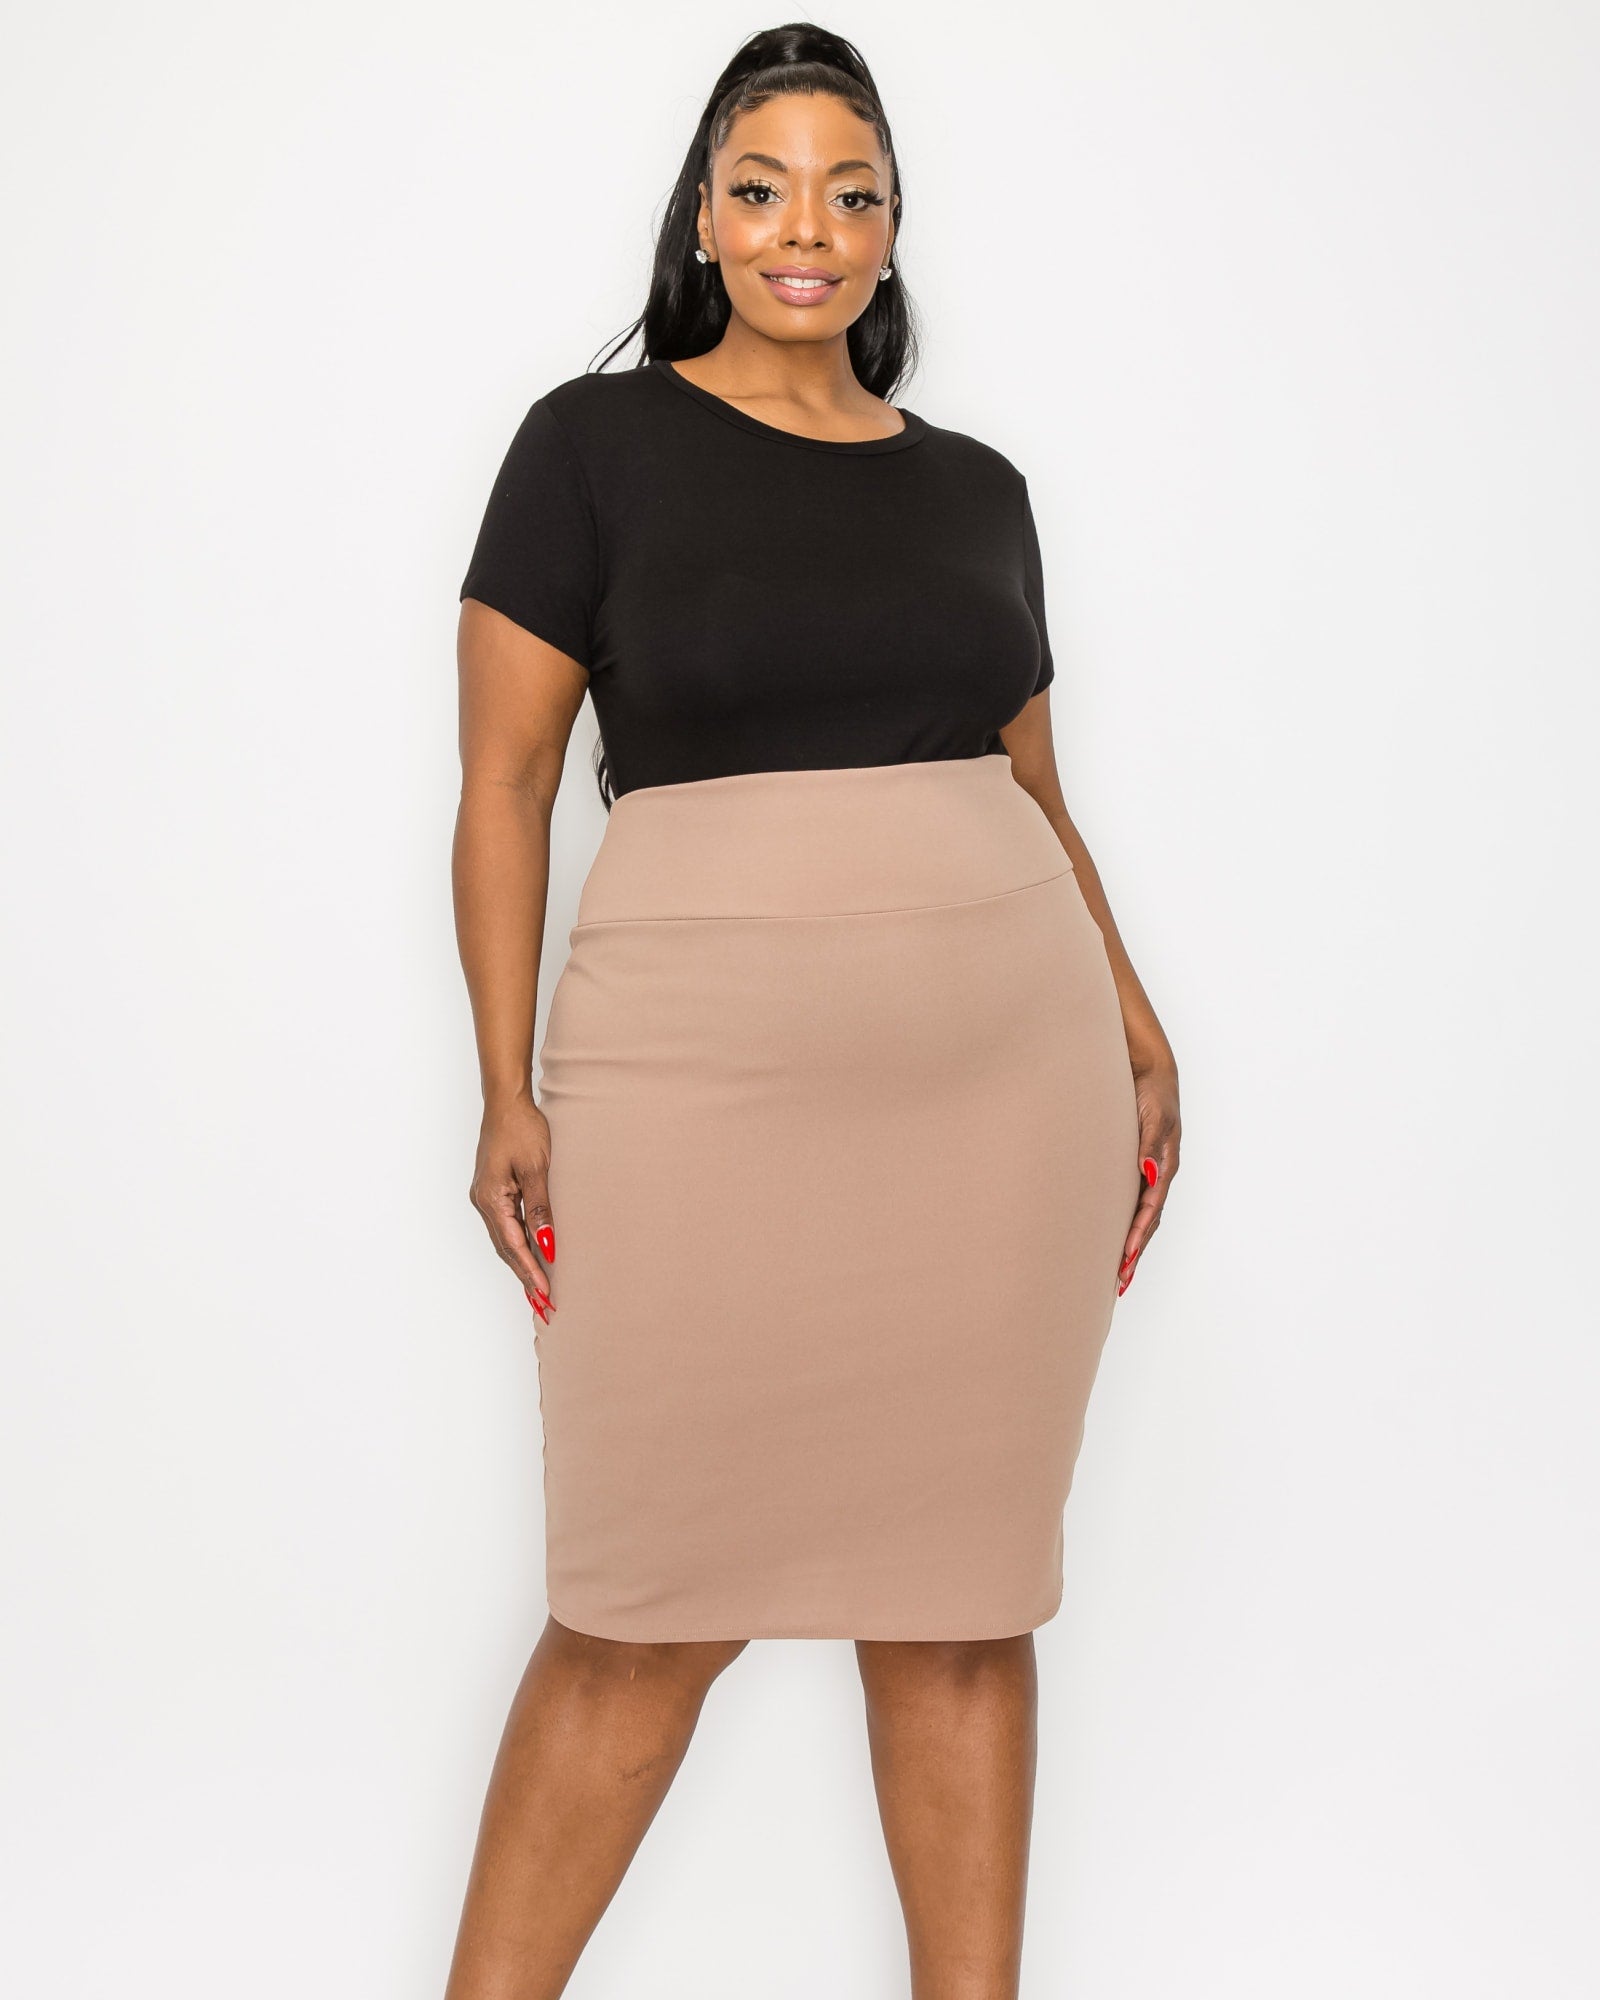 Chic Black Faux Leather Pencil Skirt Sophisticated High Waisted, Slimming  Design Perfect for Office Wear & Formal Events at  Women's Clothing  store